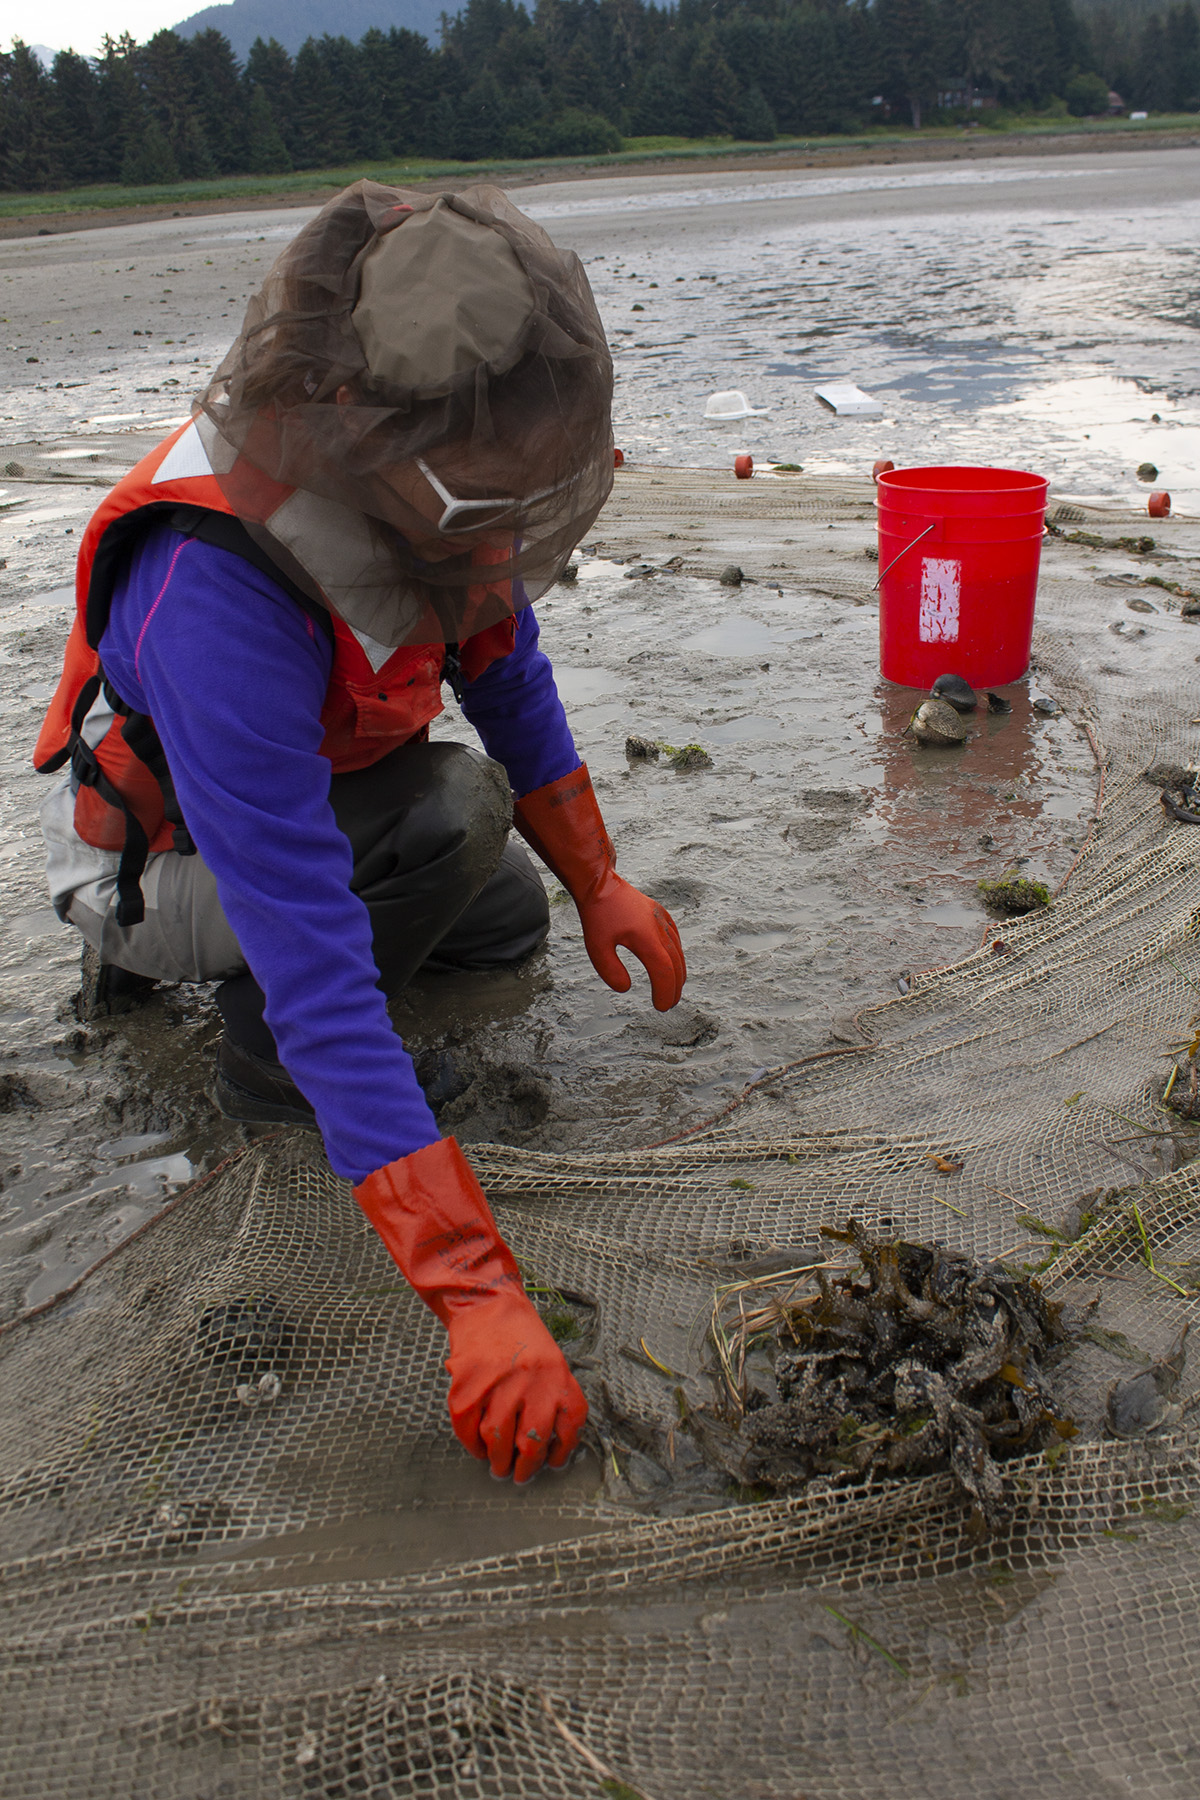 Postdoctoral student Krista OKE sorts through a seine for fish in the Mendenhall River estuary as part of the Alaska NSF EPSCoR Fire and Ice project on July 3, 2019. Photo by Tom Moran/Alaska NSF EPSCoR